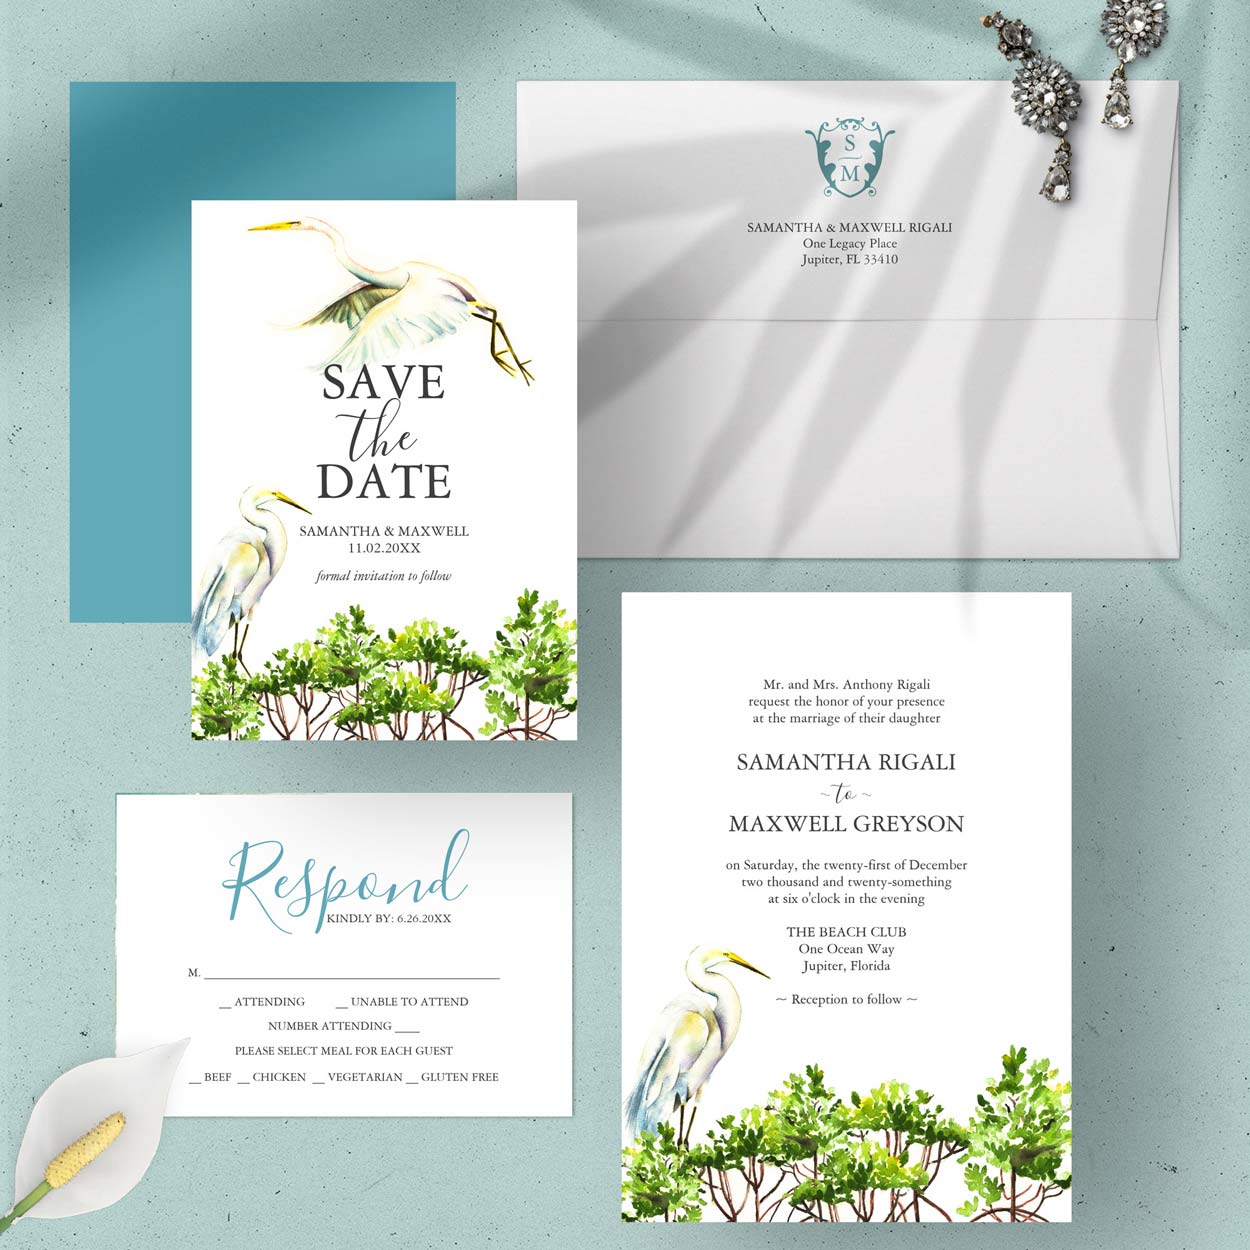 Florida destination wedding ideas. Key West and Tropical Keys wedding invitations watercolor great white heron and mangroves. Click to shop.